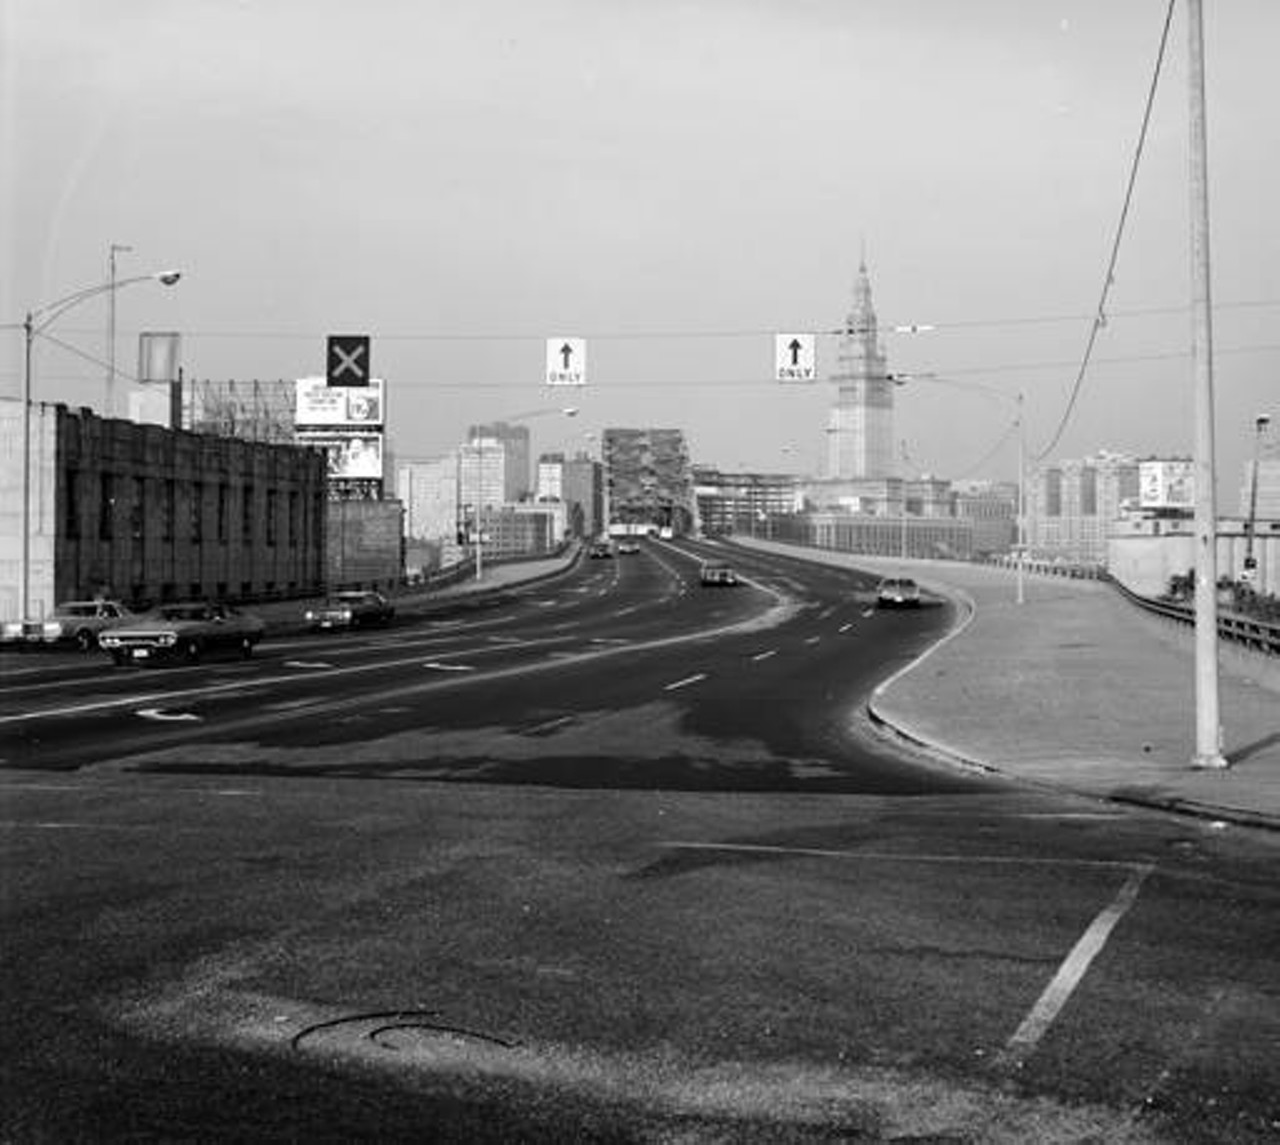 View of the Detroit-Superior Bridge taken from the intersection of W. 25th and Detroit Avenue, 1978.